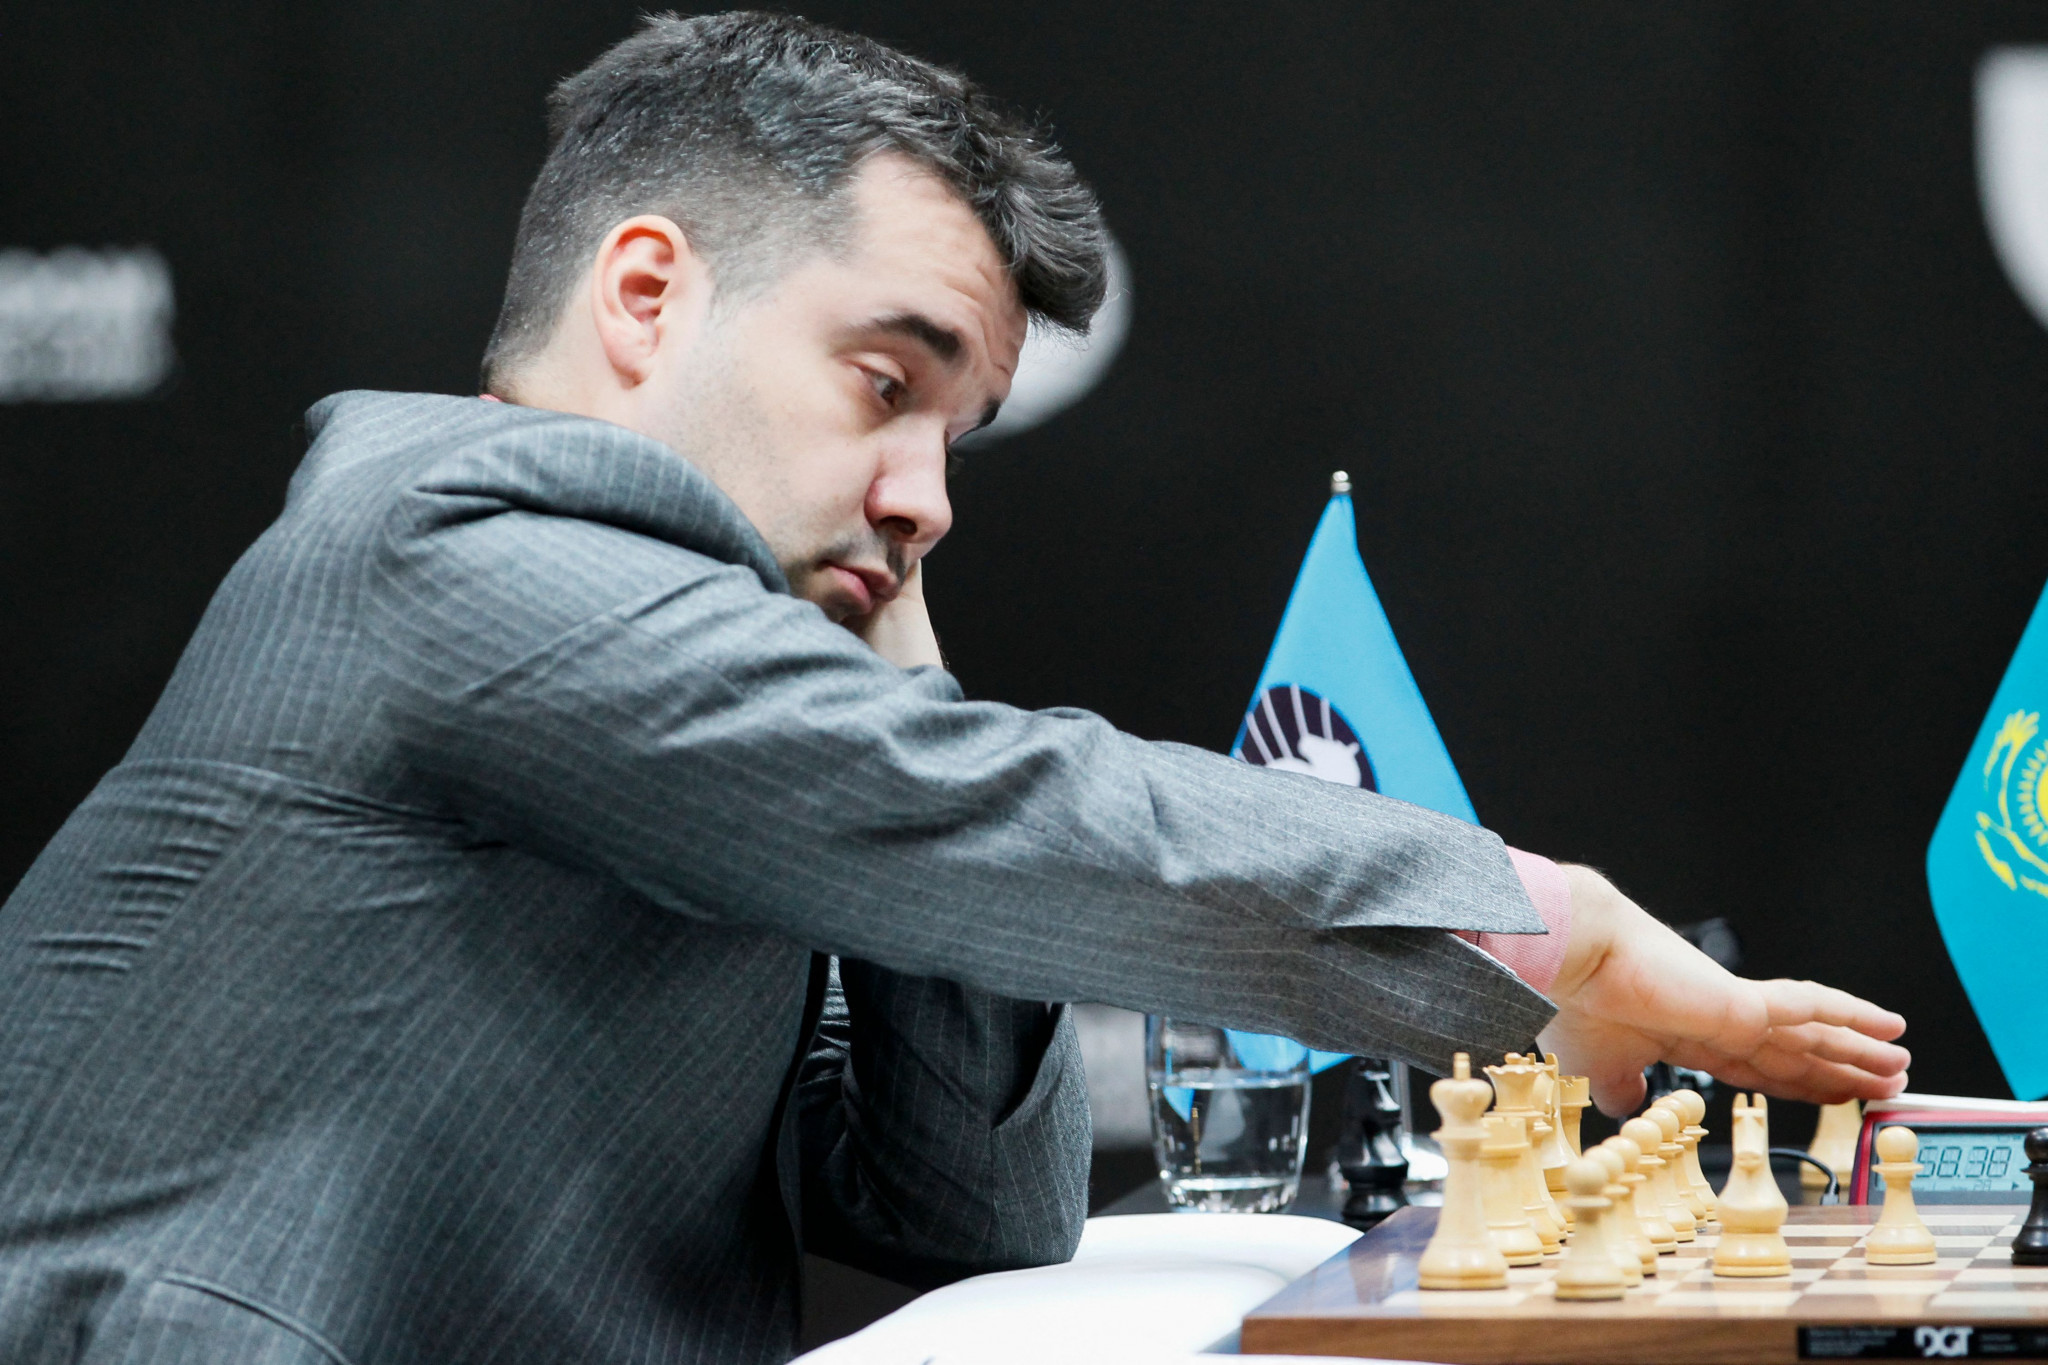 Chess Federation of Russia completes historical switch to Asia